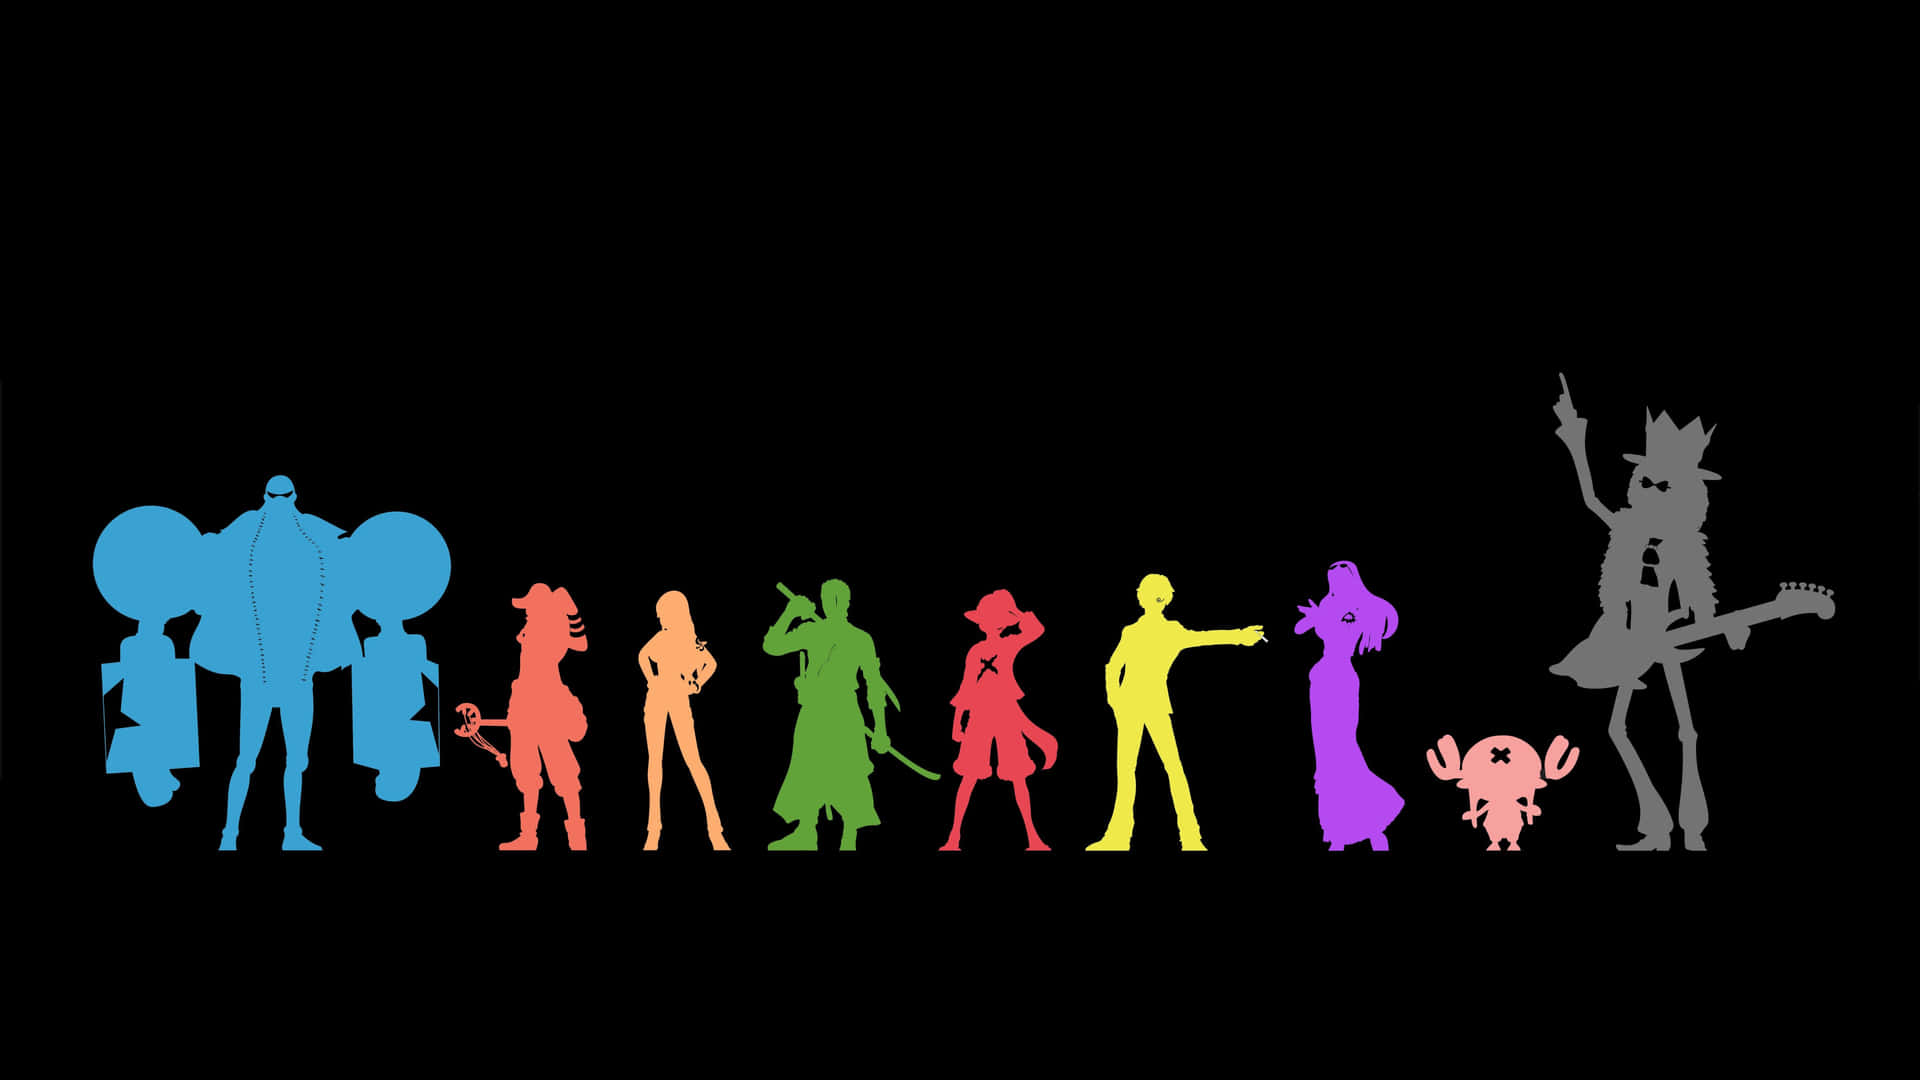 One Piece Straw Hat Crew Silhouettes Wallpaper